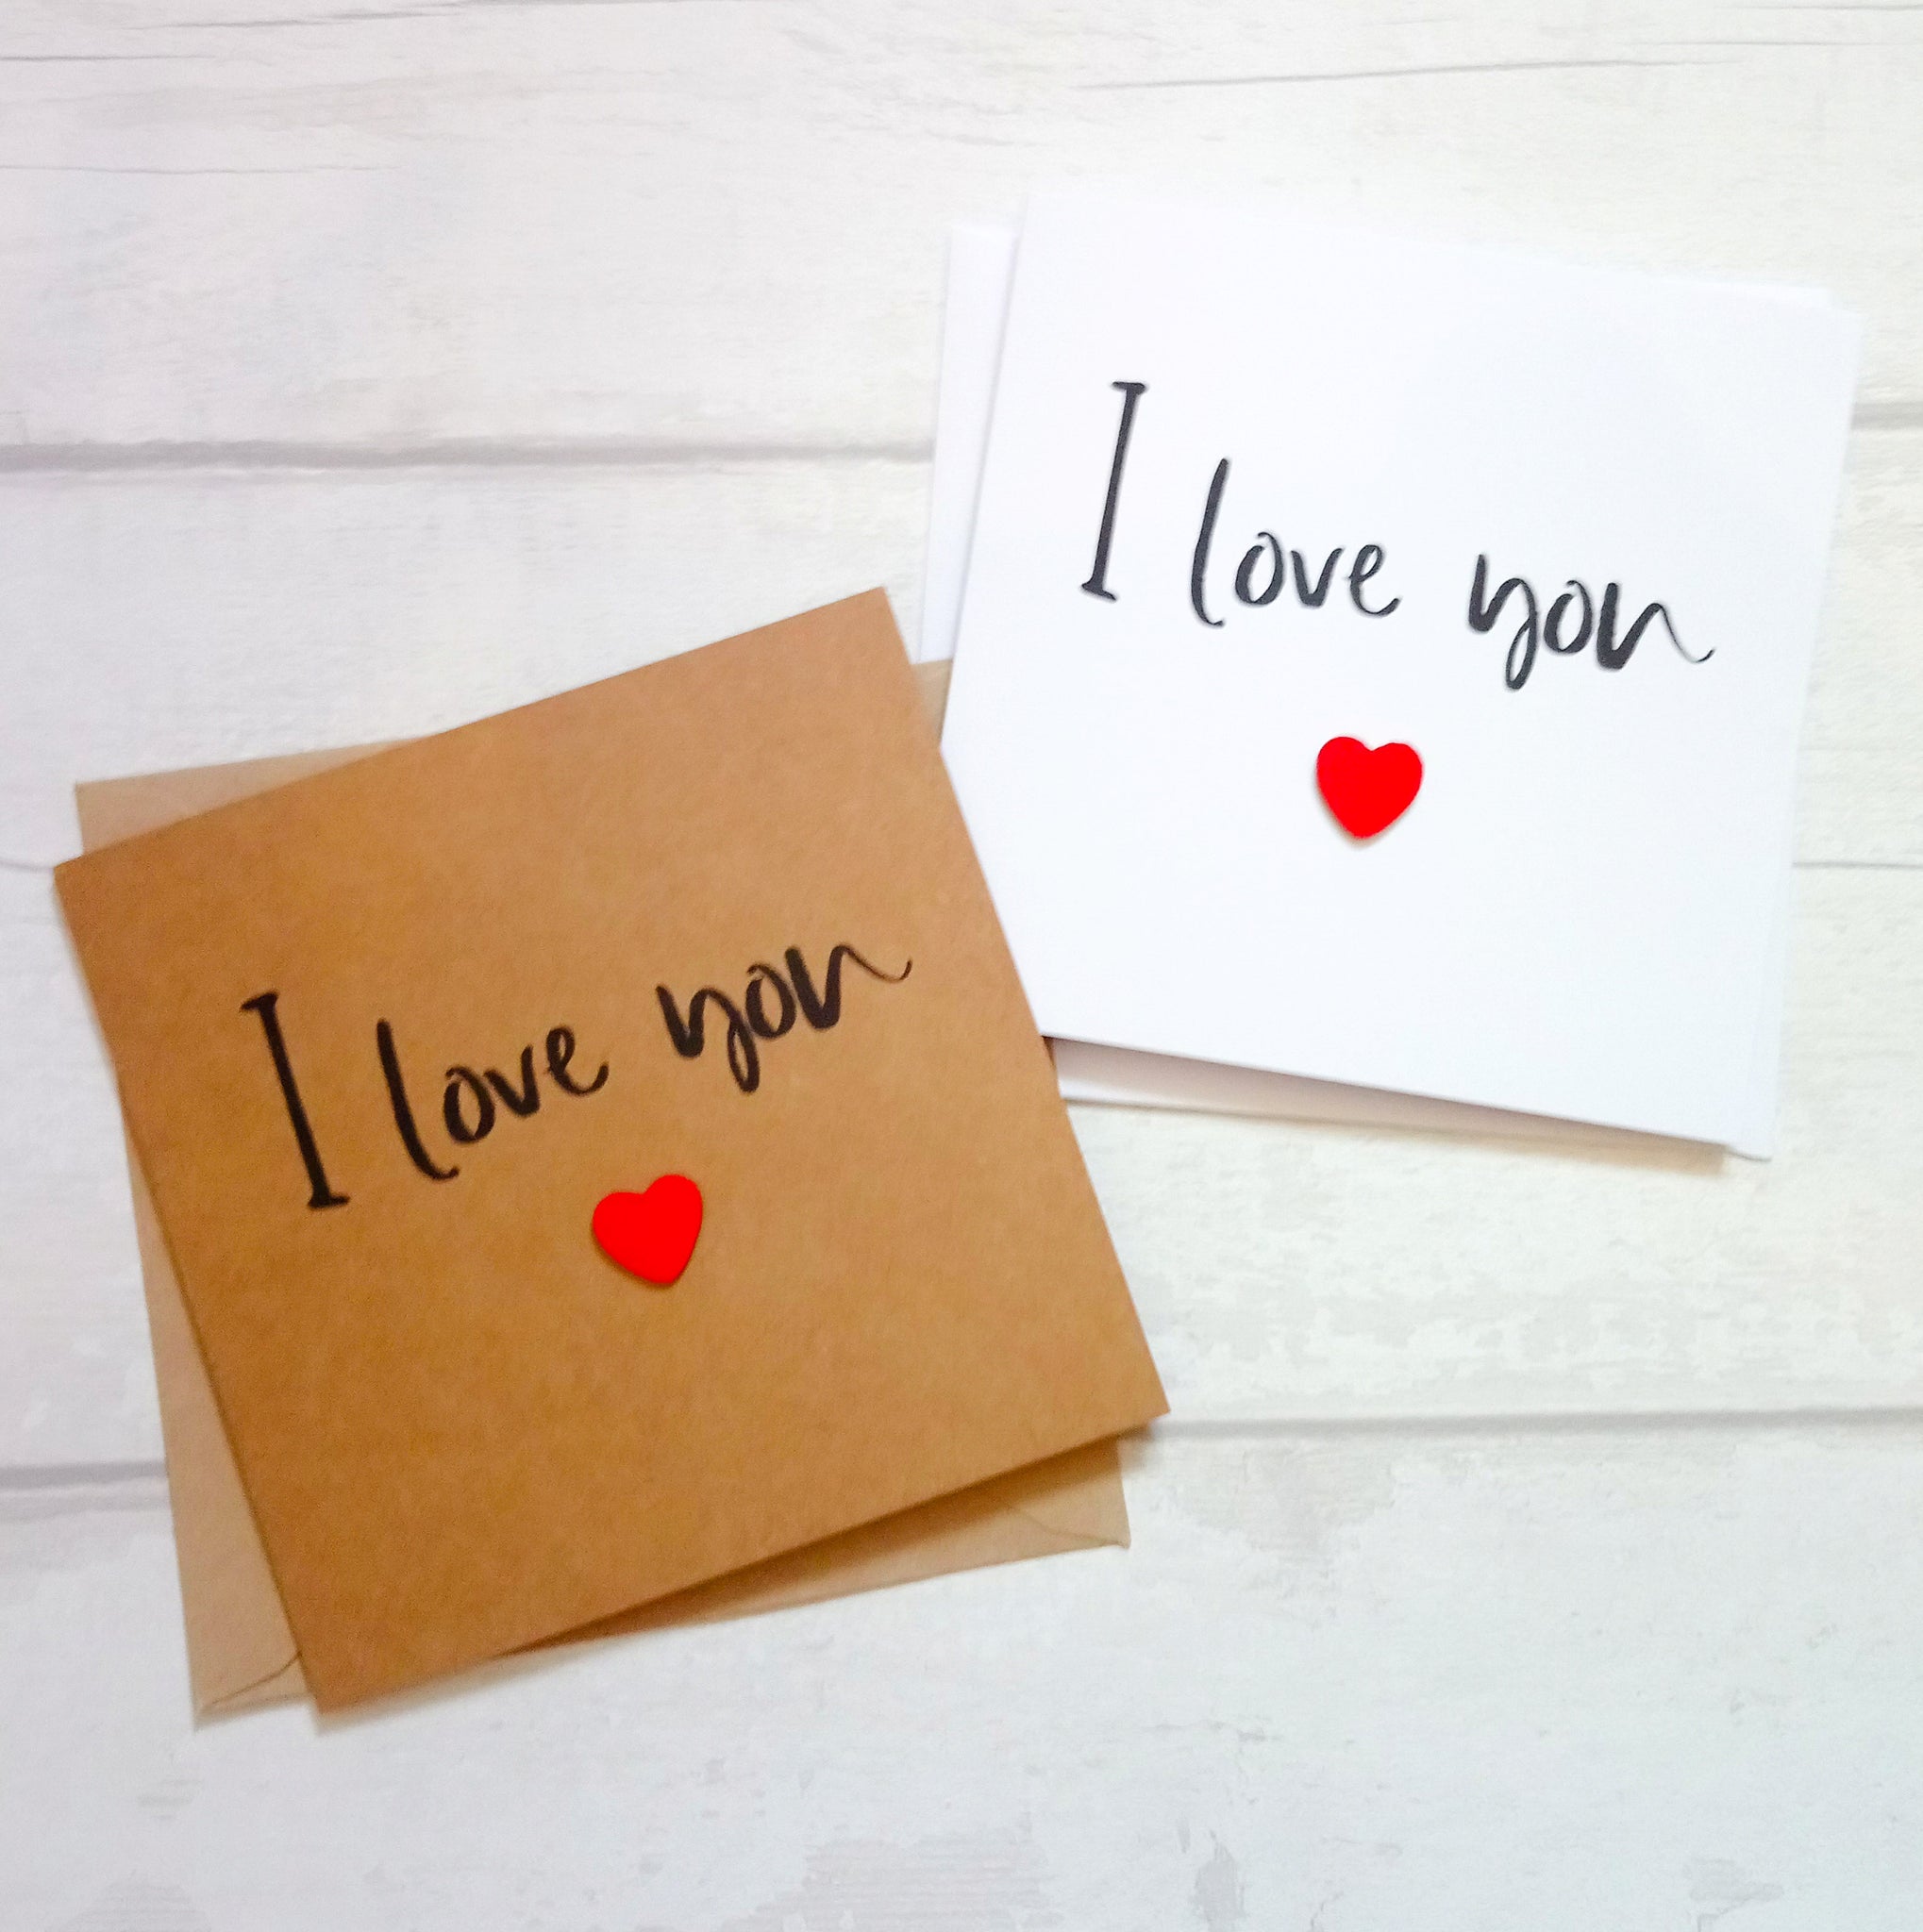 Handmade cute and simple "I love you" card - Valentine's, wedding, anniversary, just because